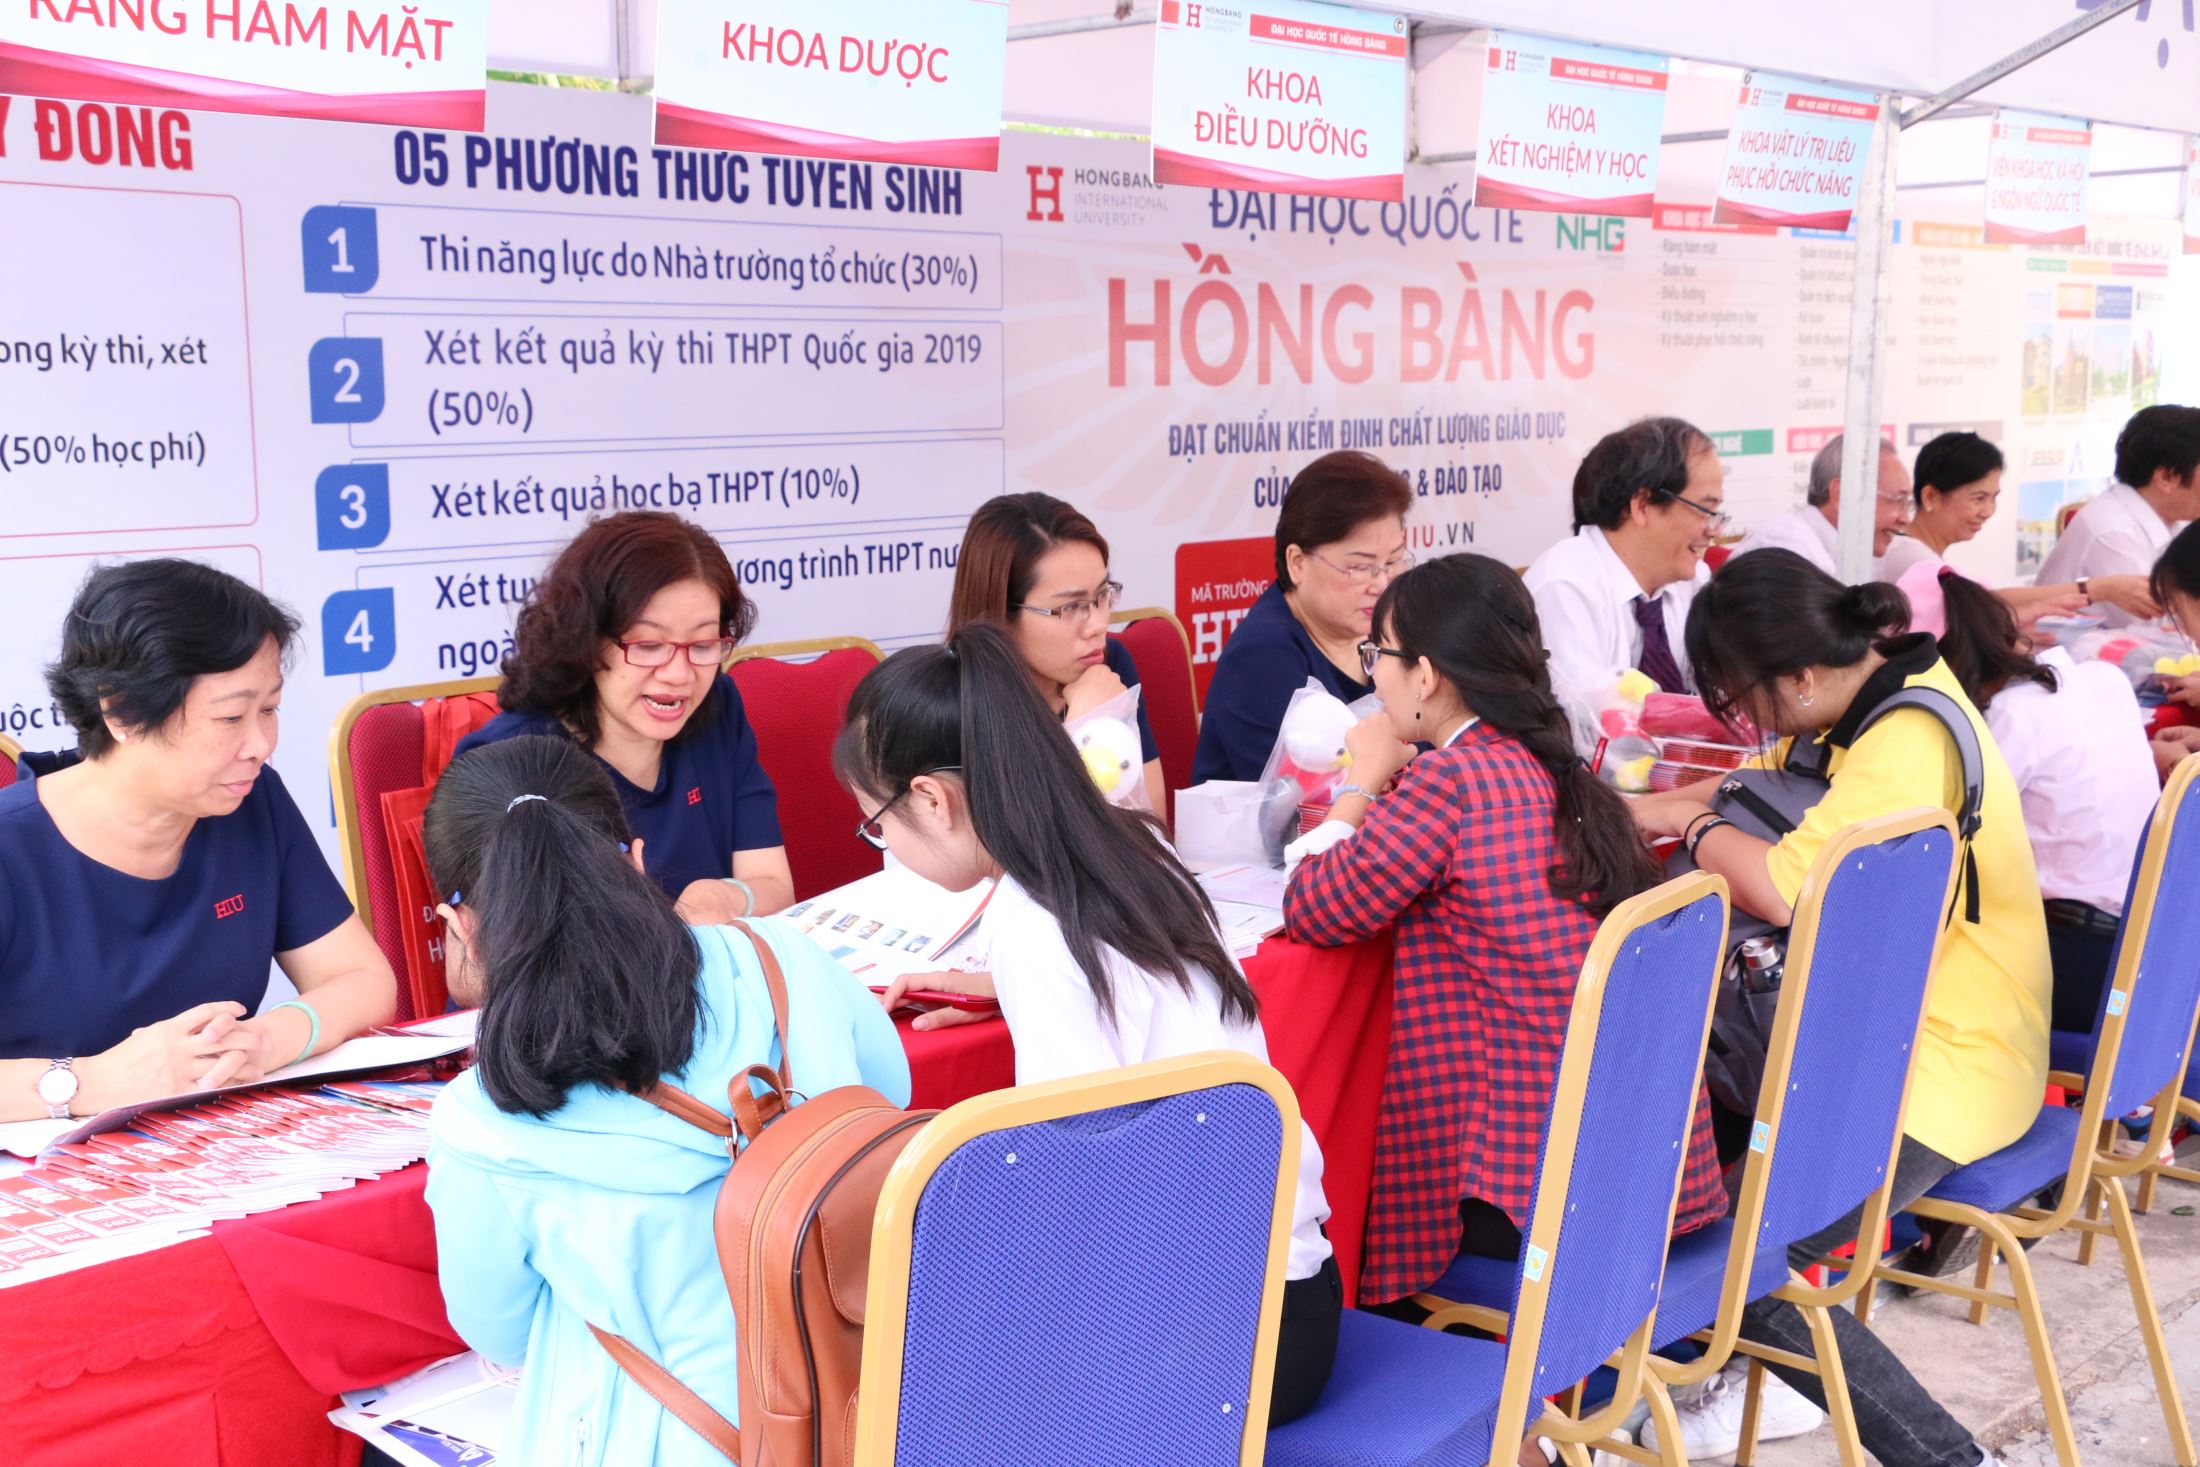 The consulting booth of universities under the education system of Nguyen Hoang Group.